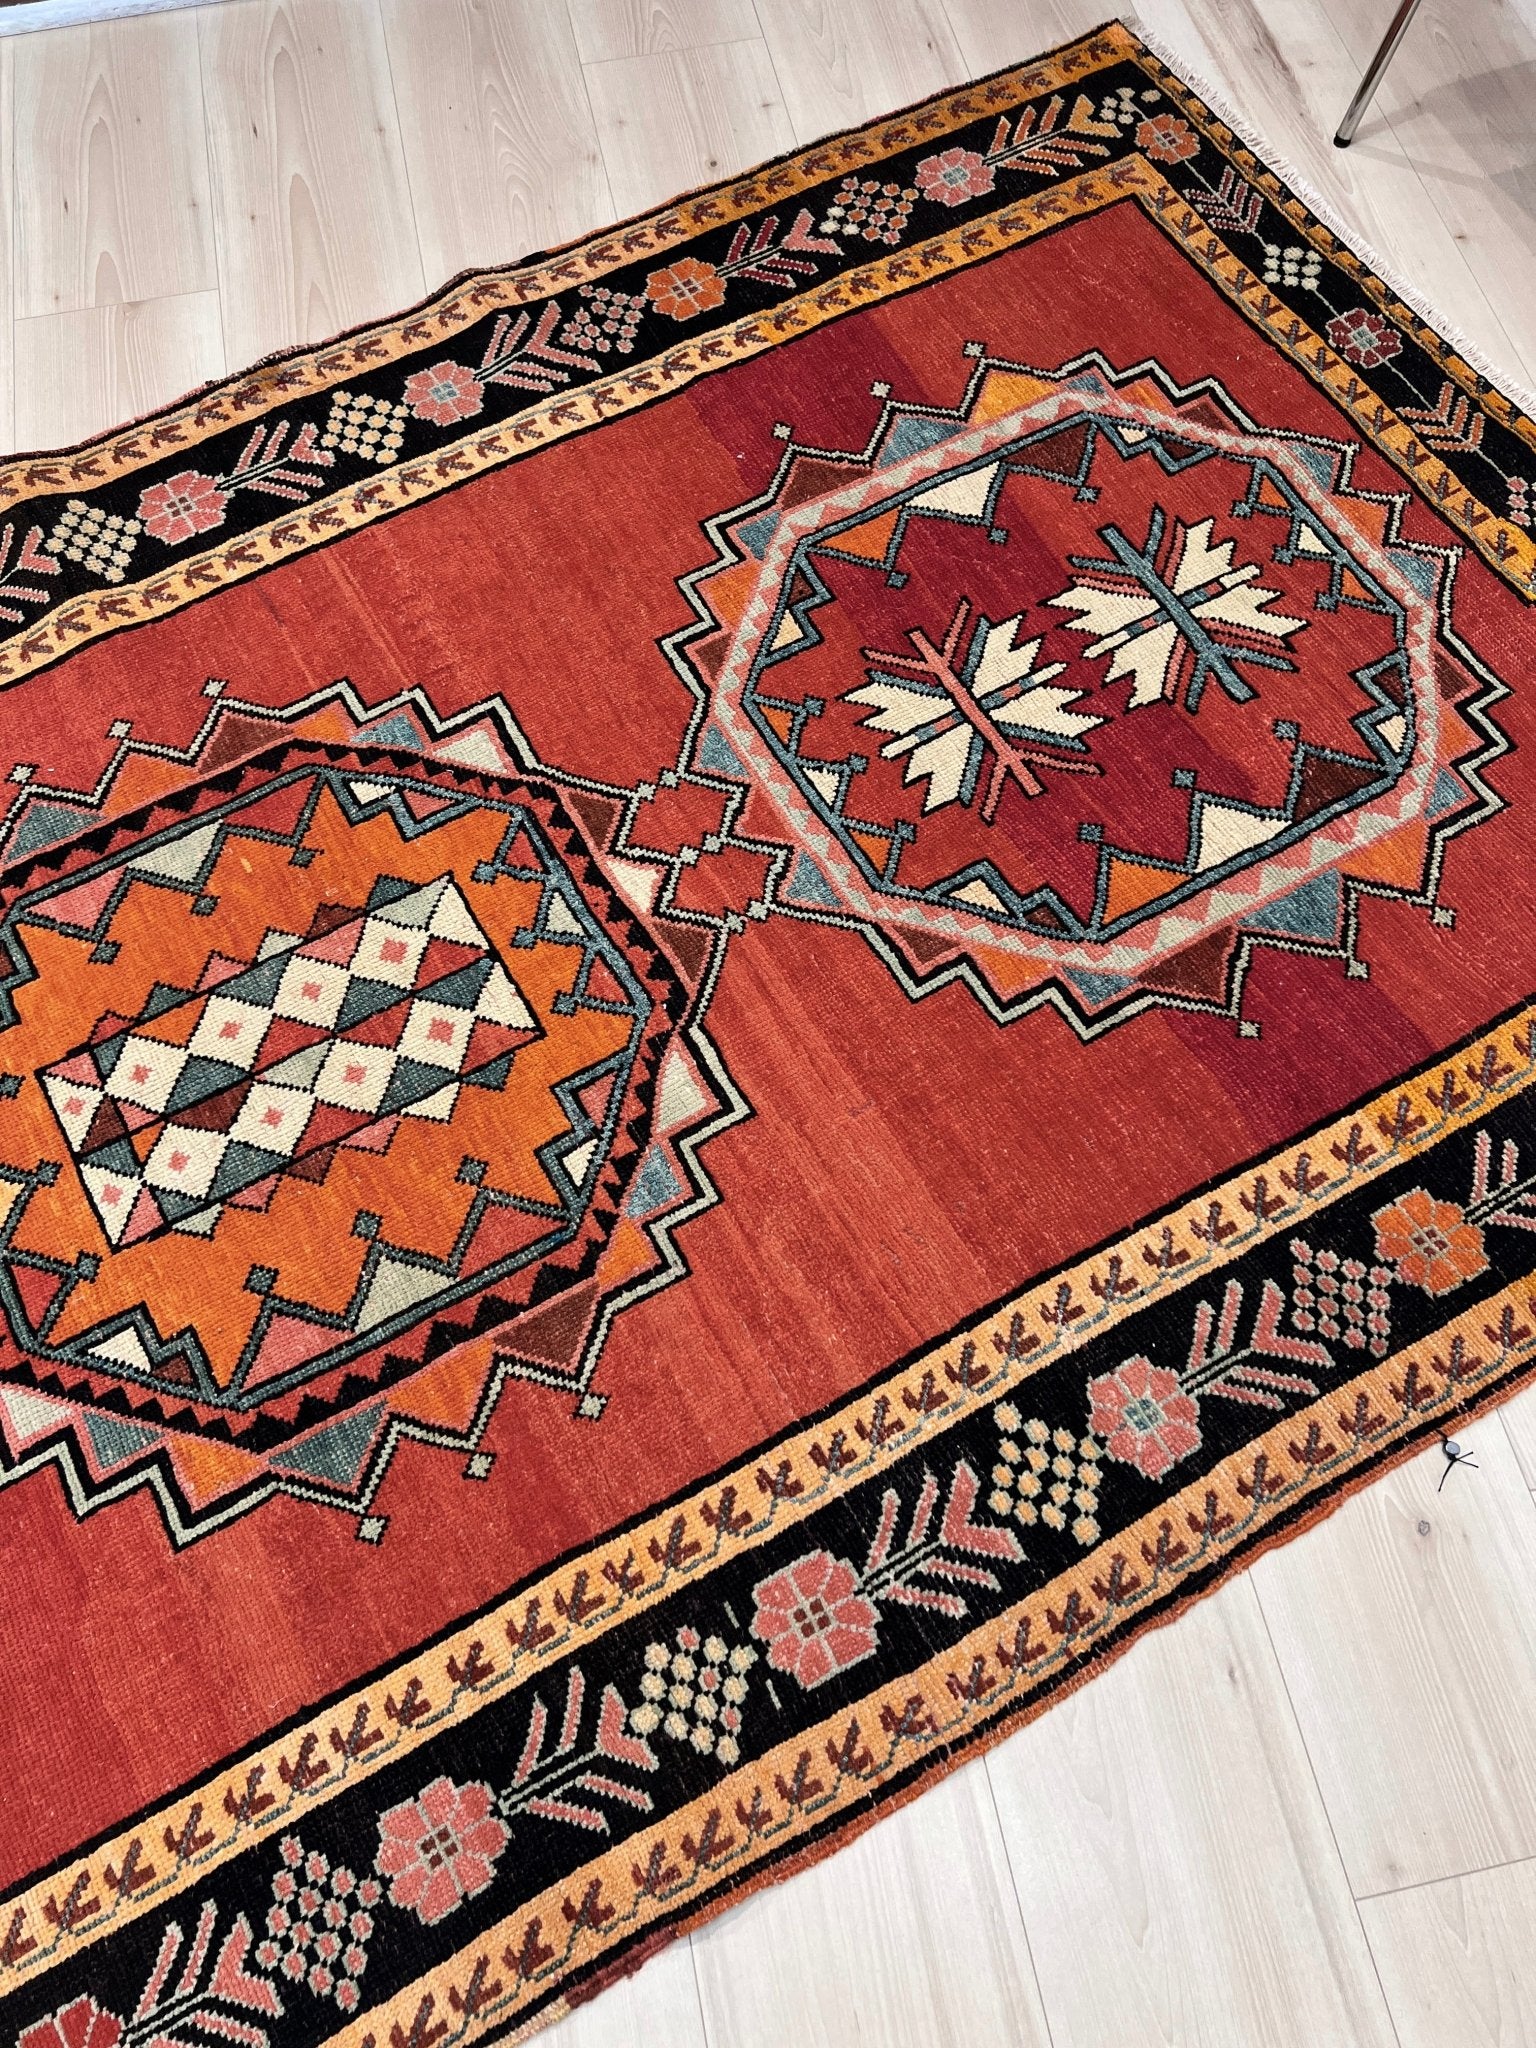 Derbend Caucasian Wide Runner rug. Oriental rug store San Francisco Bay Area. Buy rug online free shipping to USA, Canada.